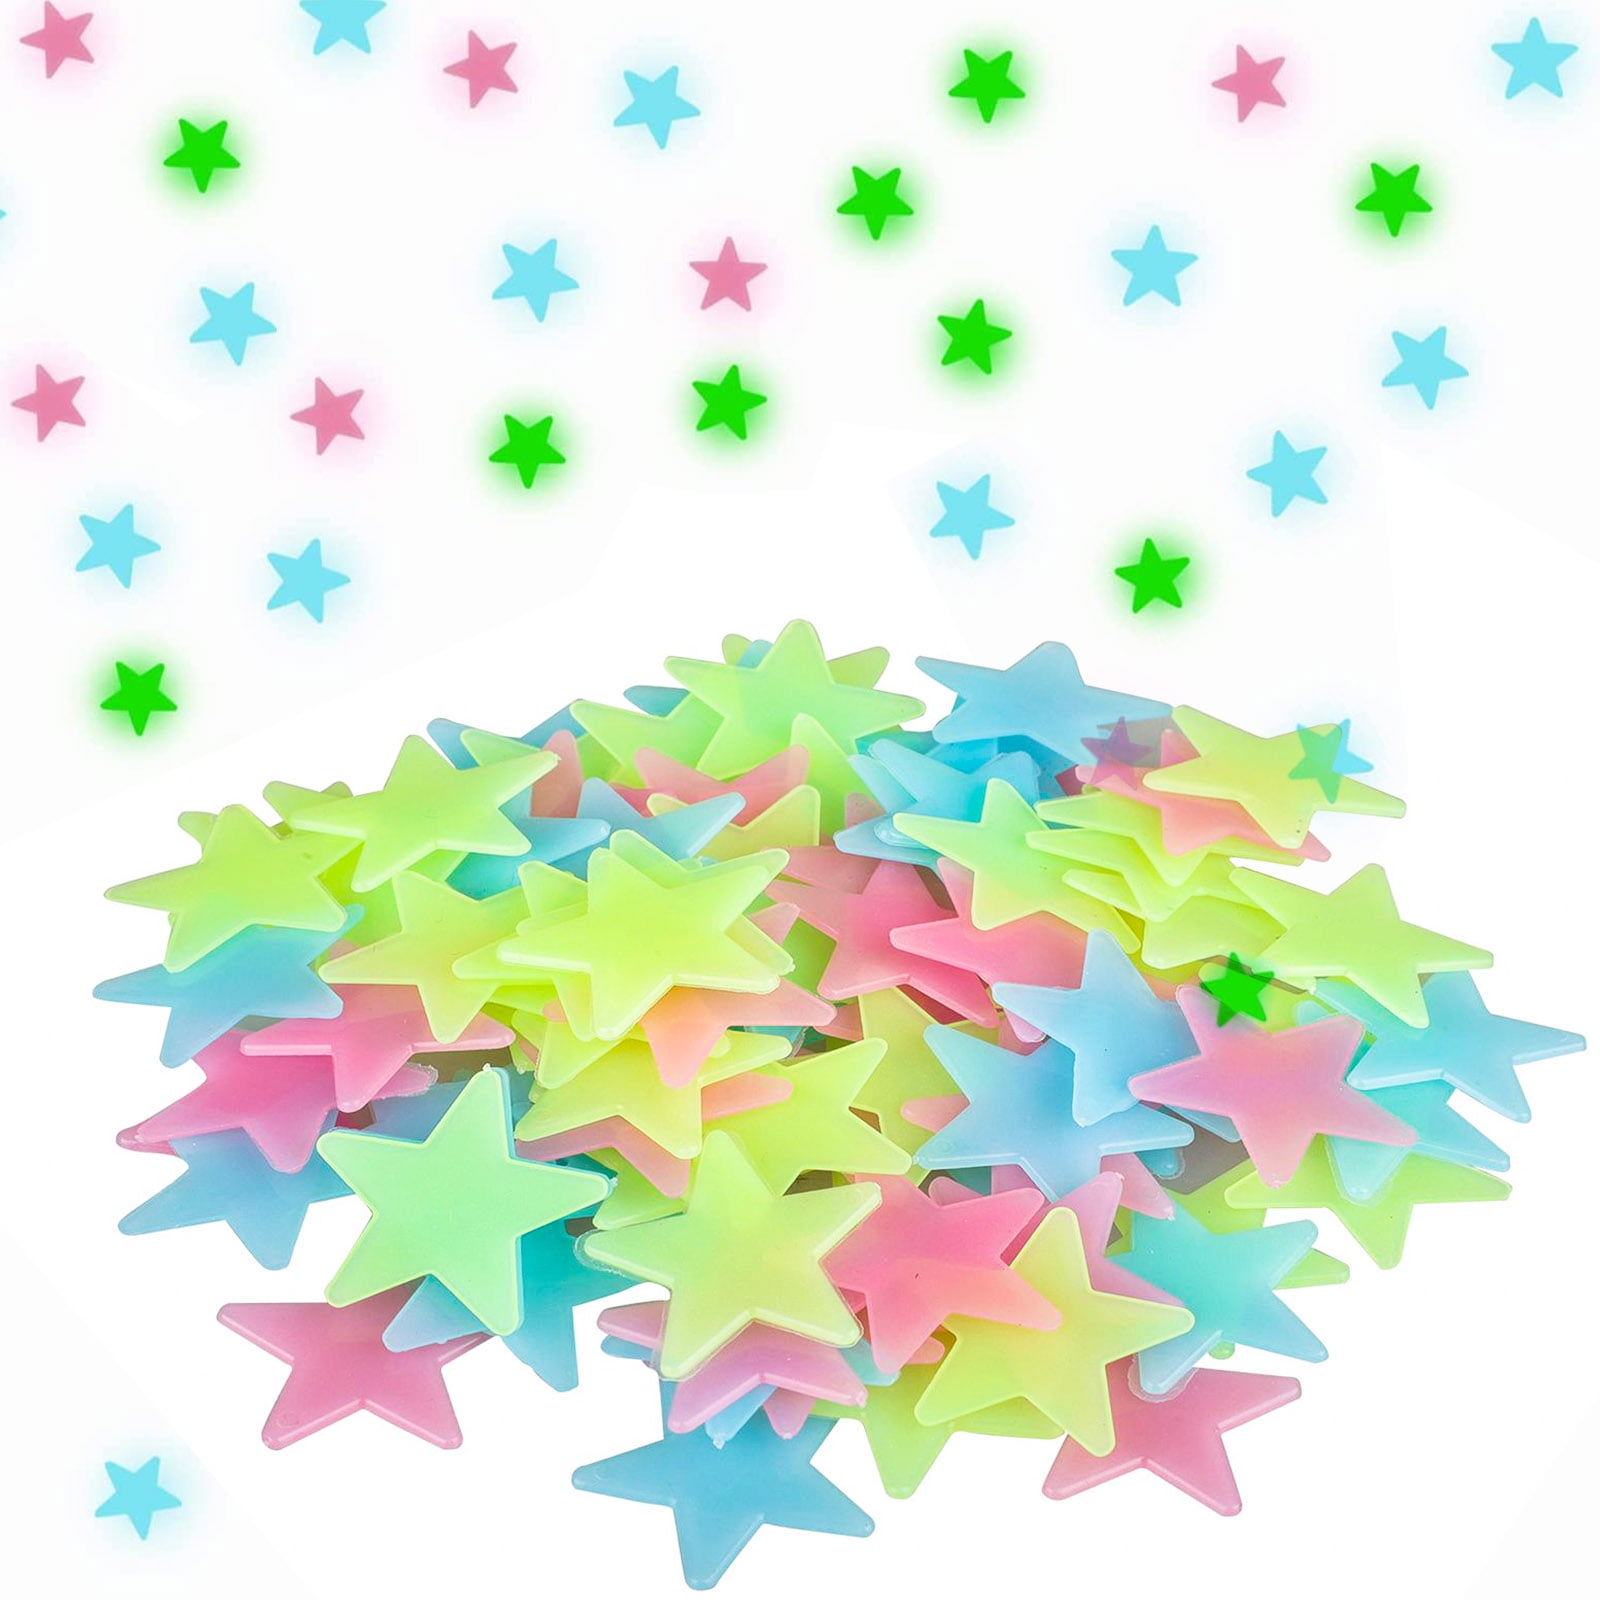 Sunny Days Entertainment CoComelon Glow in The Dark Stars 50 Assorted Shape and Color Stickers for Kids Peel and Stick Wall Decals,Multi 